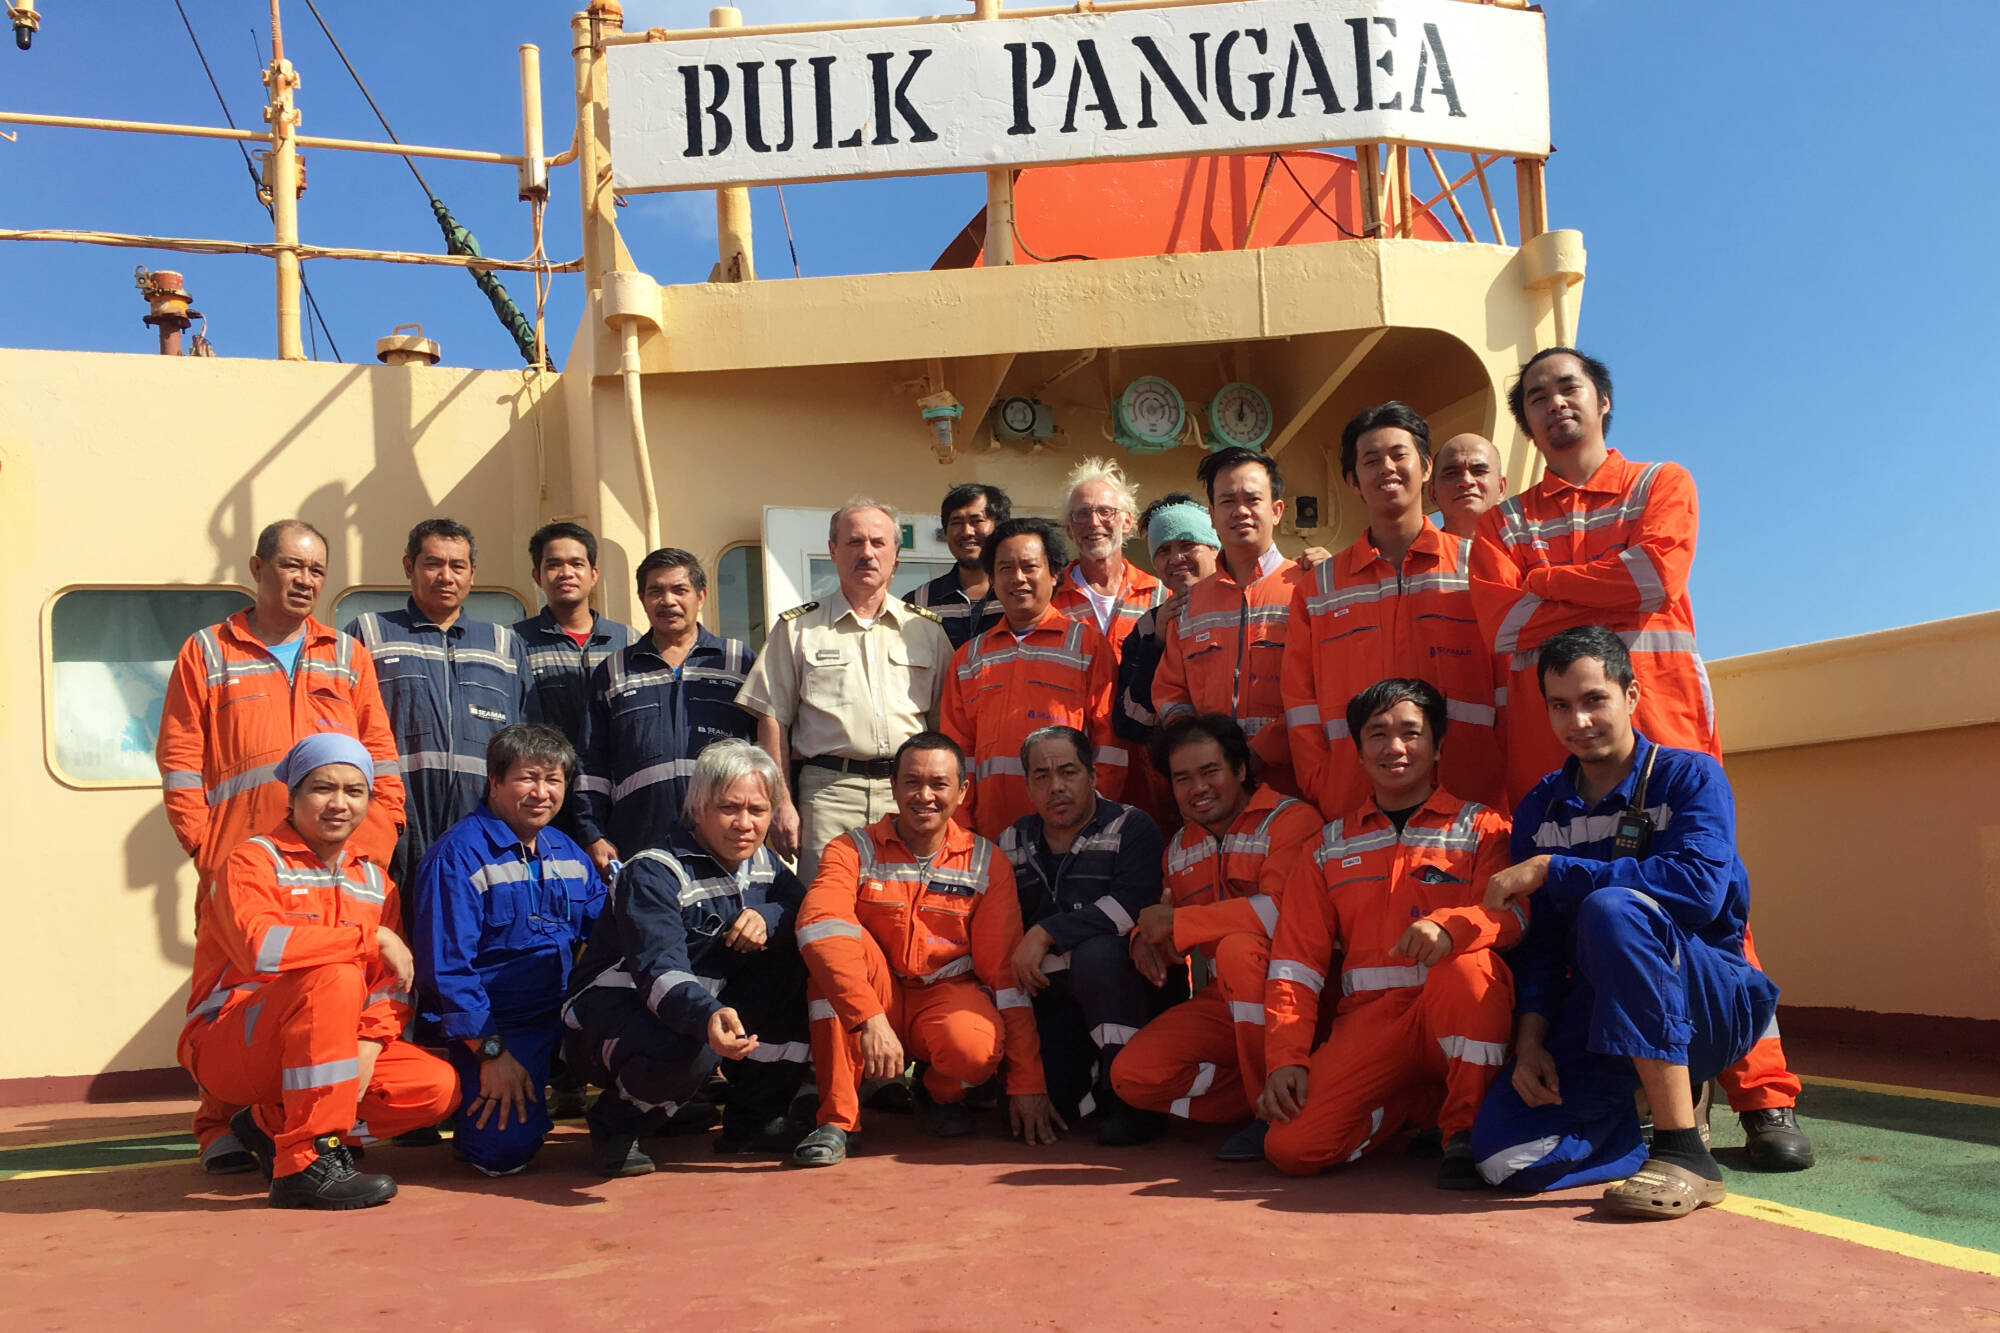 The Bulk Pangaea, a 225-metre bulk carrier, picked up Shuswap resident Don Cavers (at back with white hair) in a life raft in the Caribbean Sea in mid-December 2021 and took him to Jamaica after his disabled sailboat crashed on a reef. (Photo contributed)